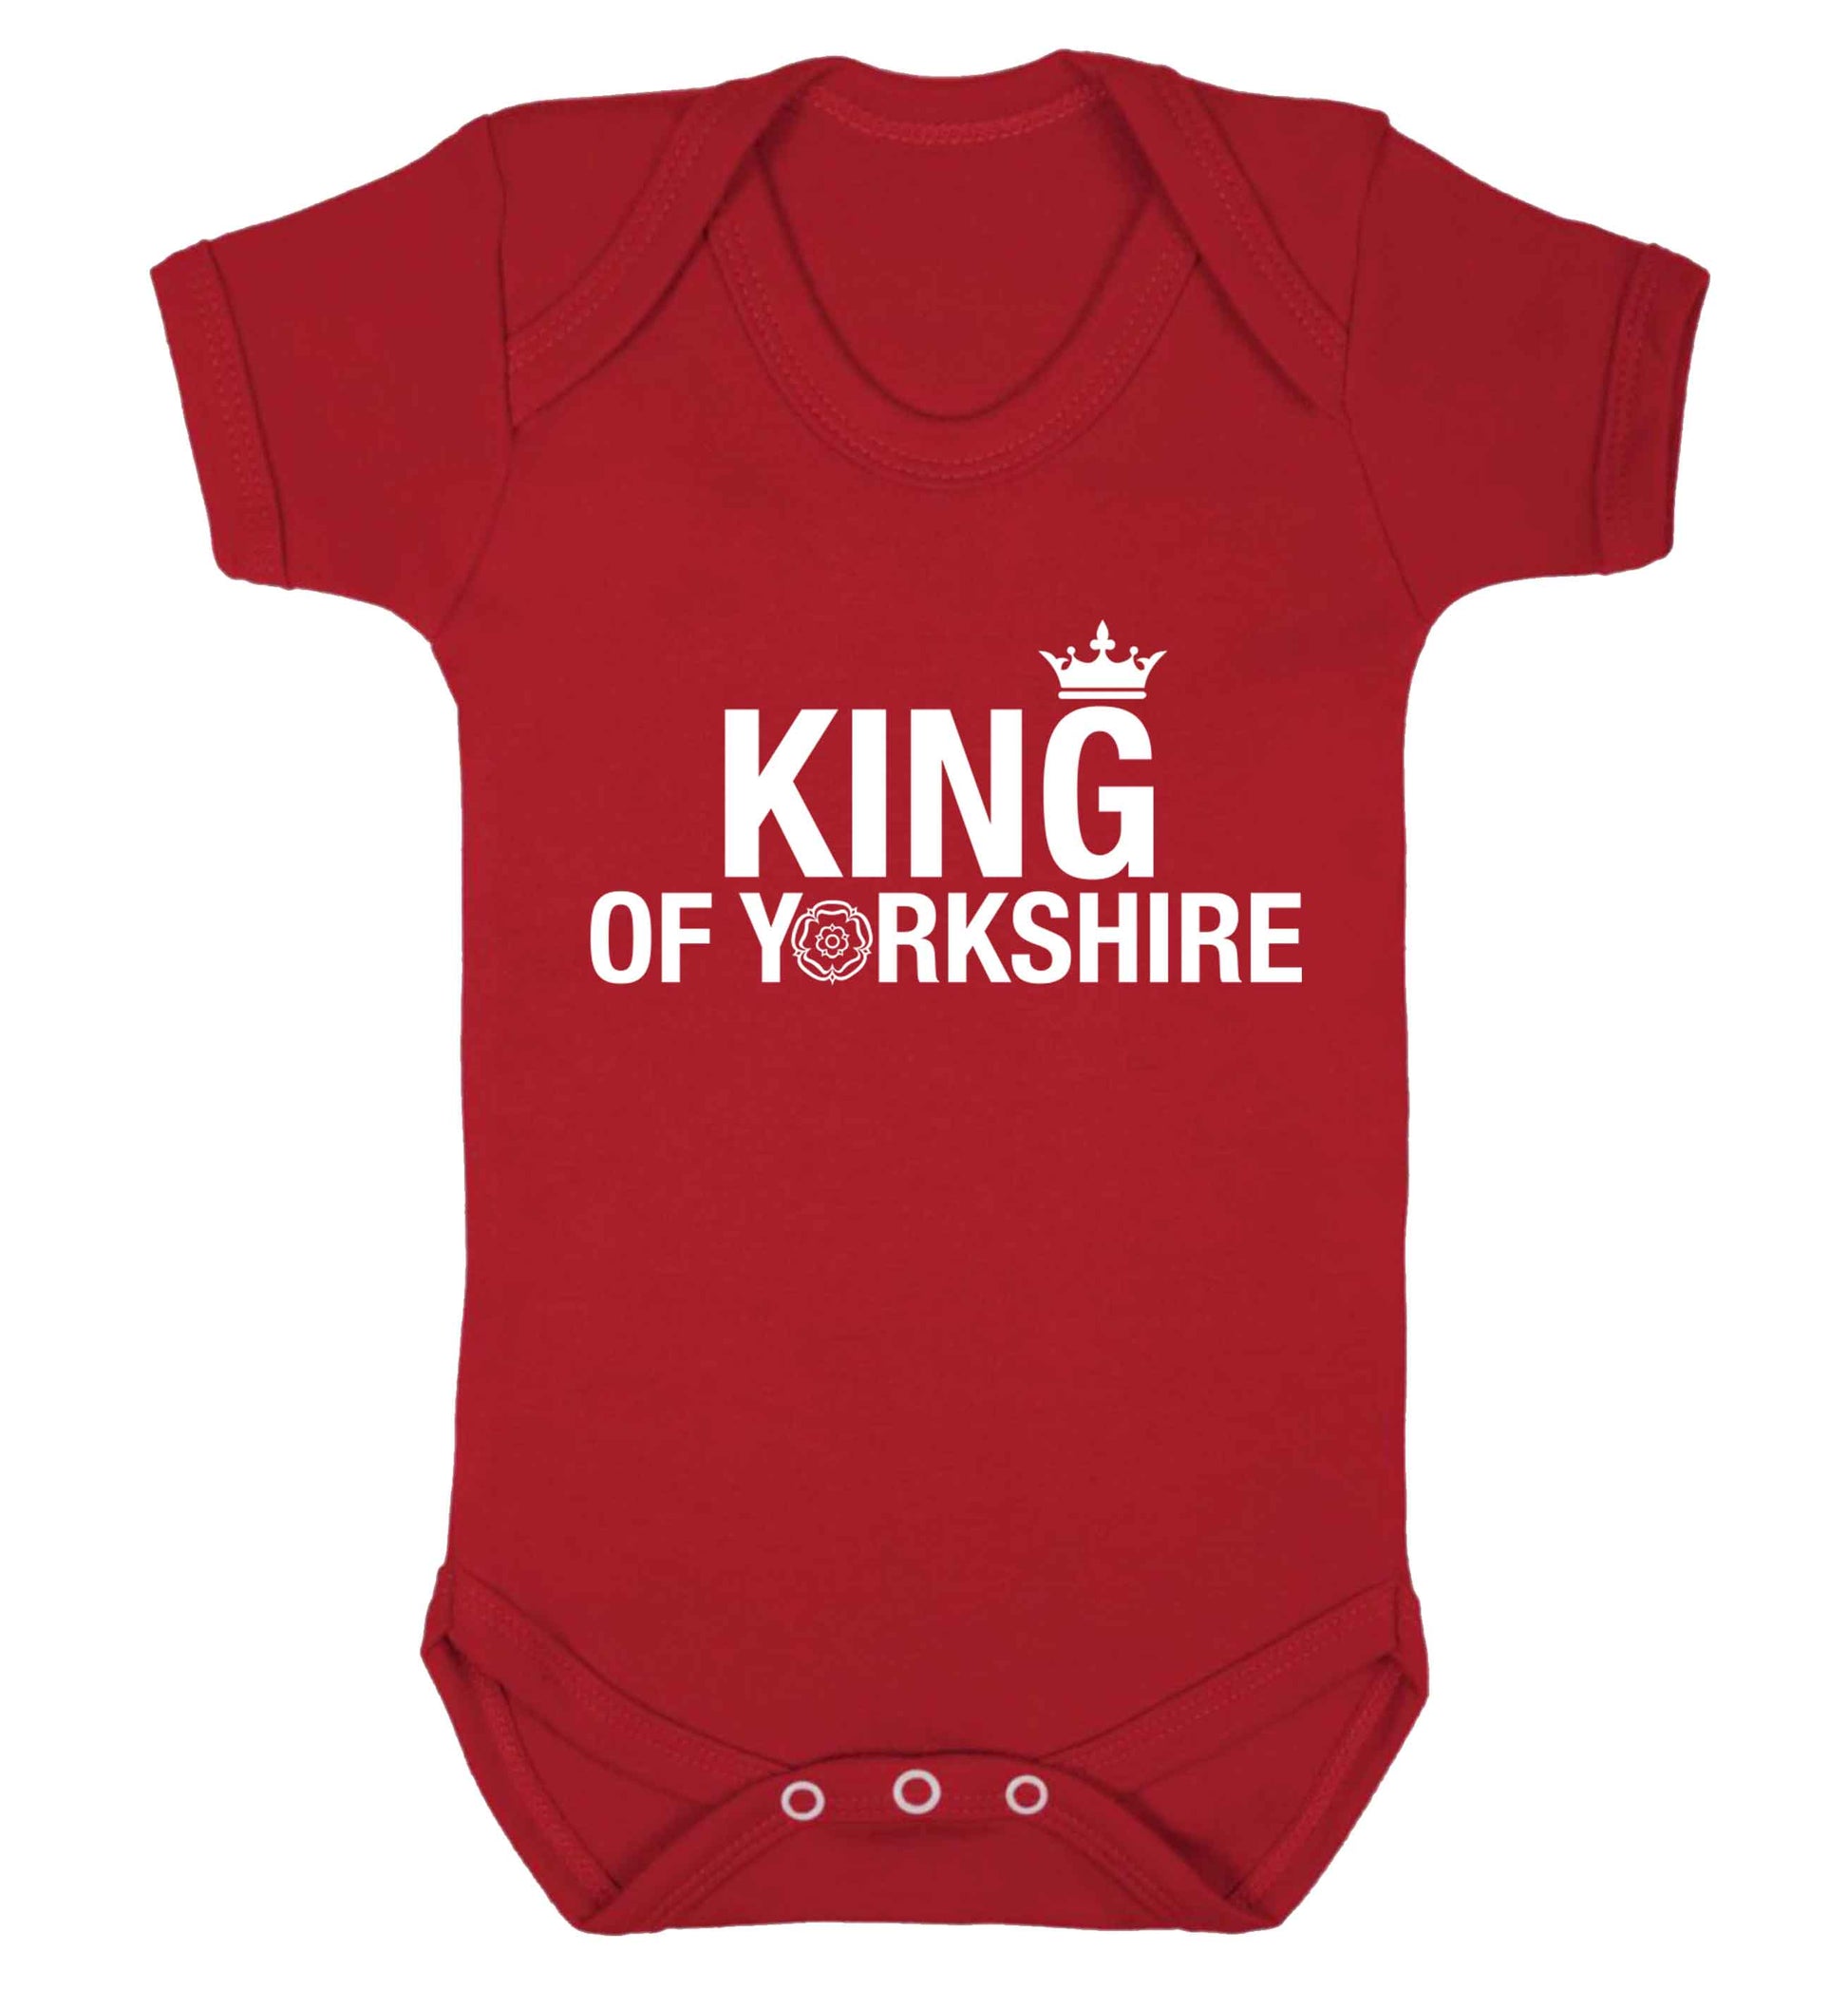 King of Yorkshire Baby Vest red 18-24 months